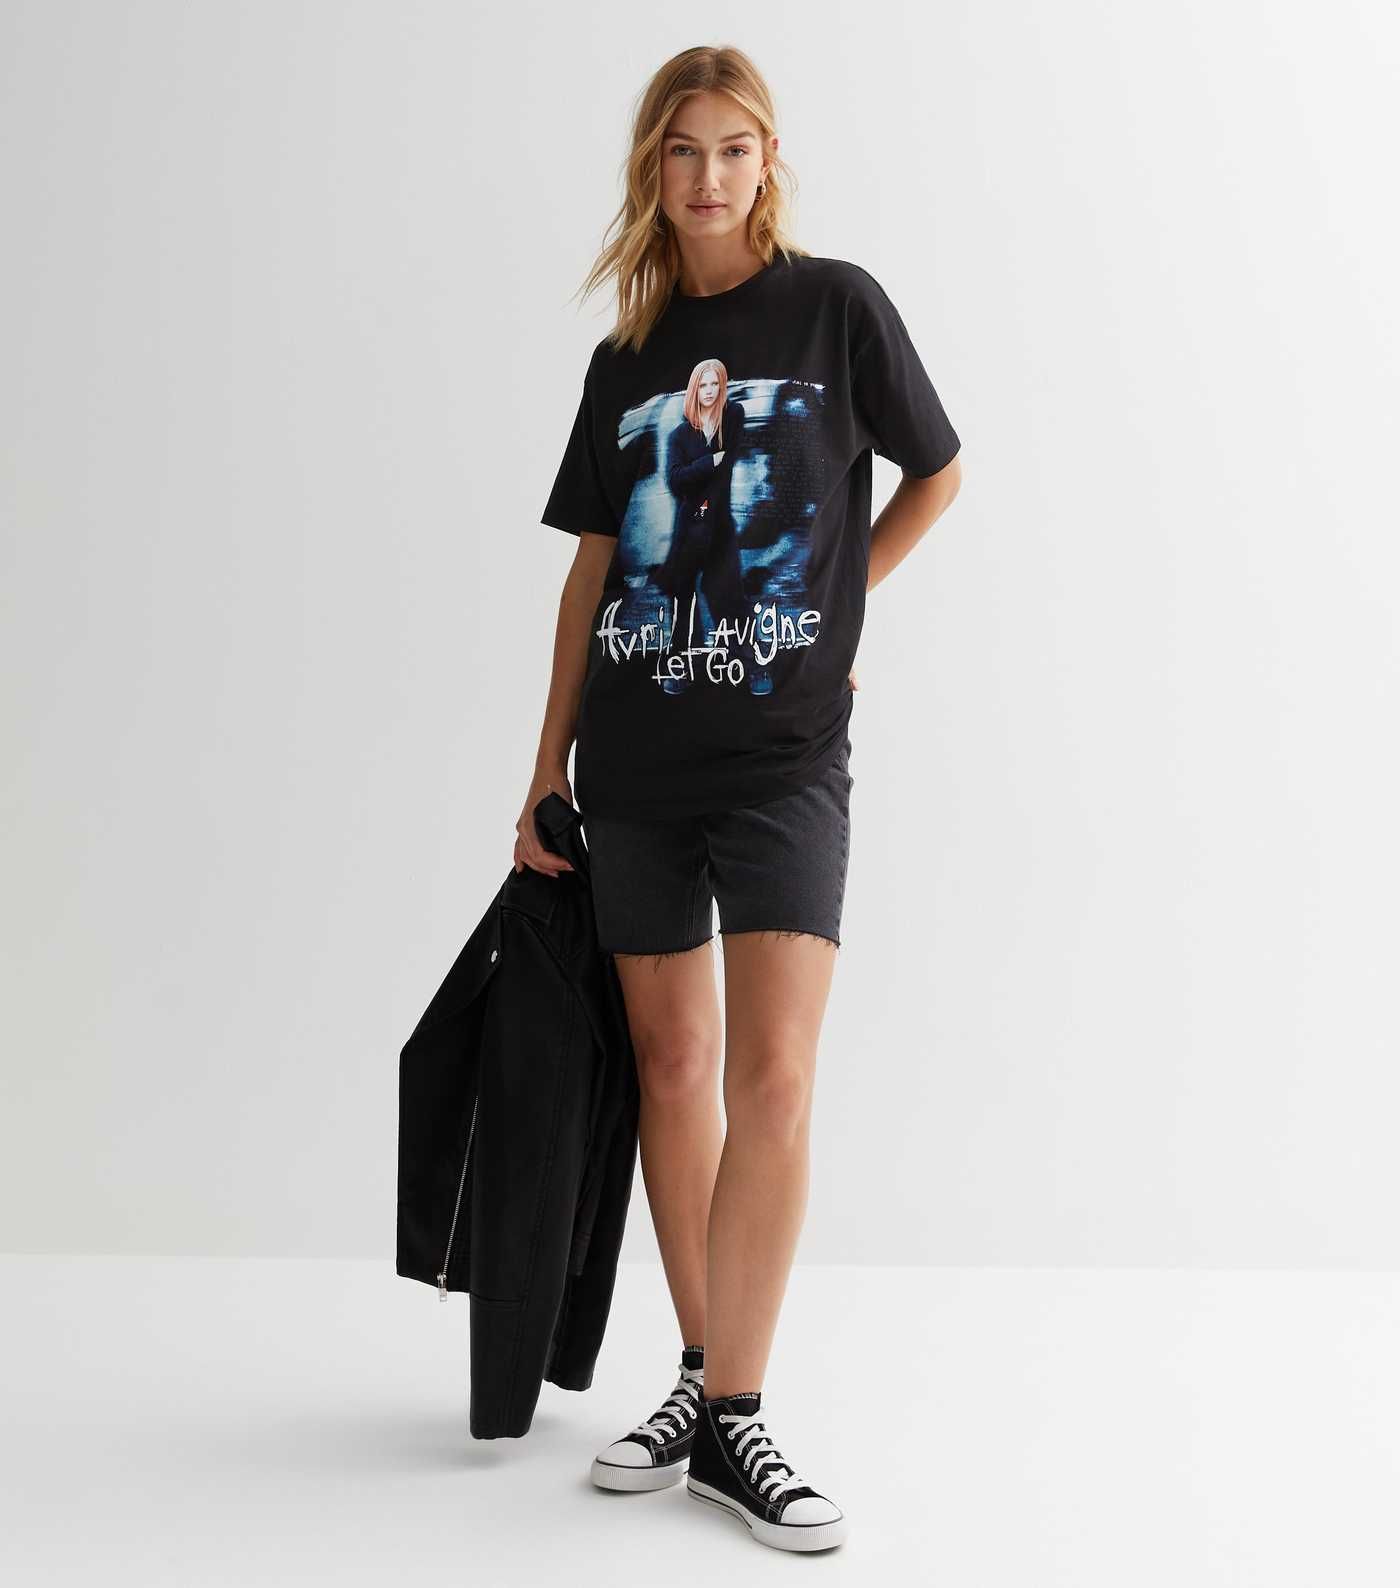 Black Logo Avril Lavigne Let Go Oversized T-Shirt
						
						Add to Saved Items
						Remove fr... | New Look (UK)